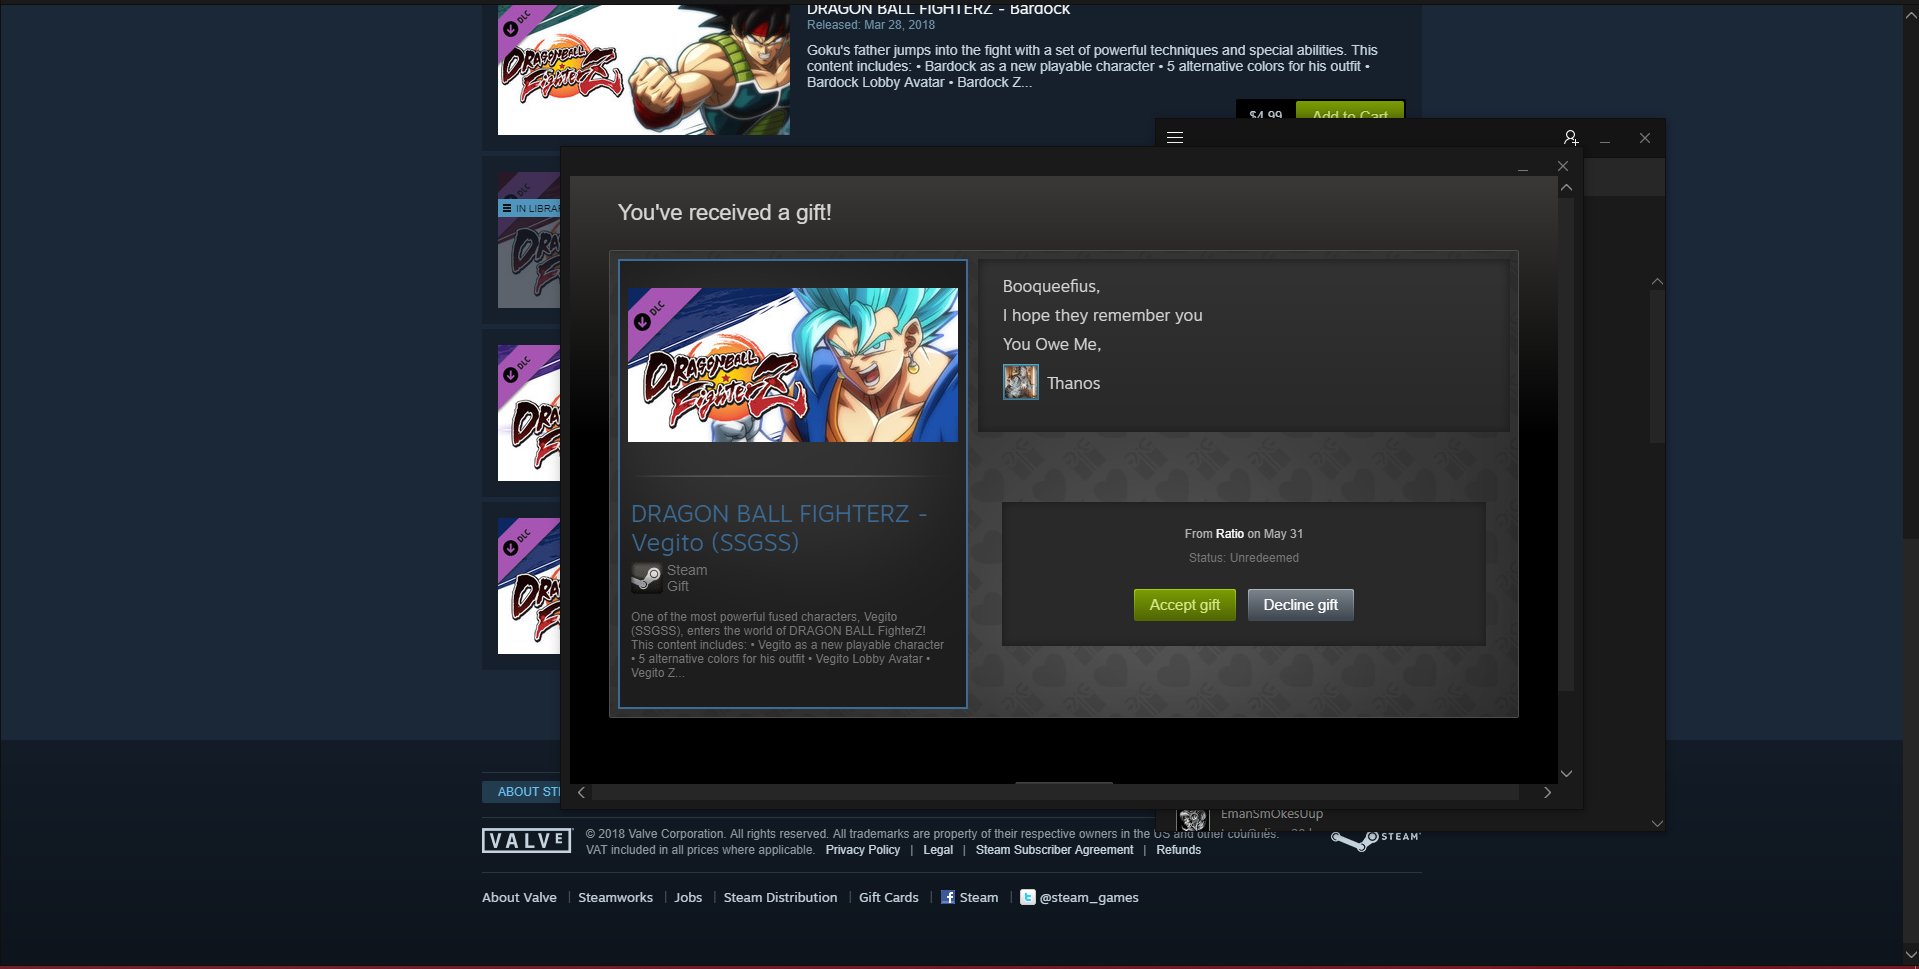 can you refund a declined gift steam